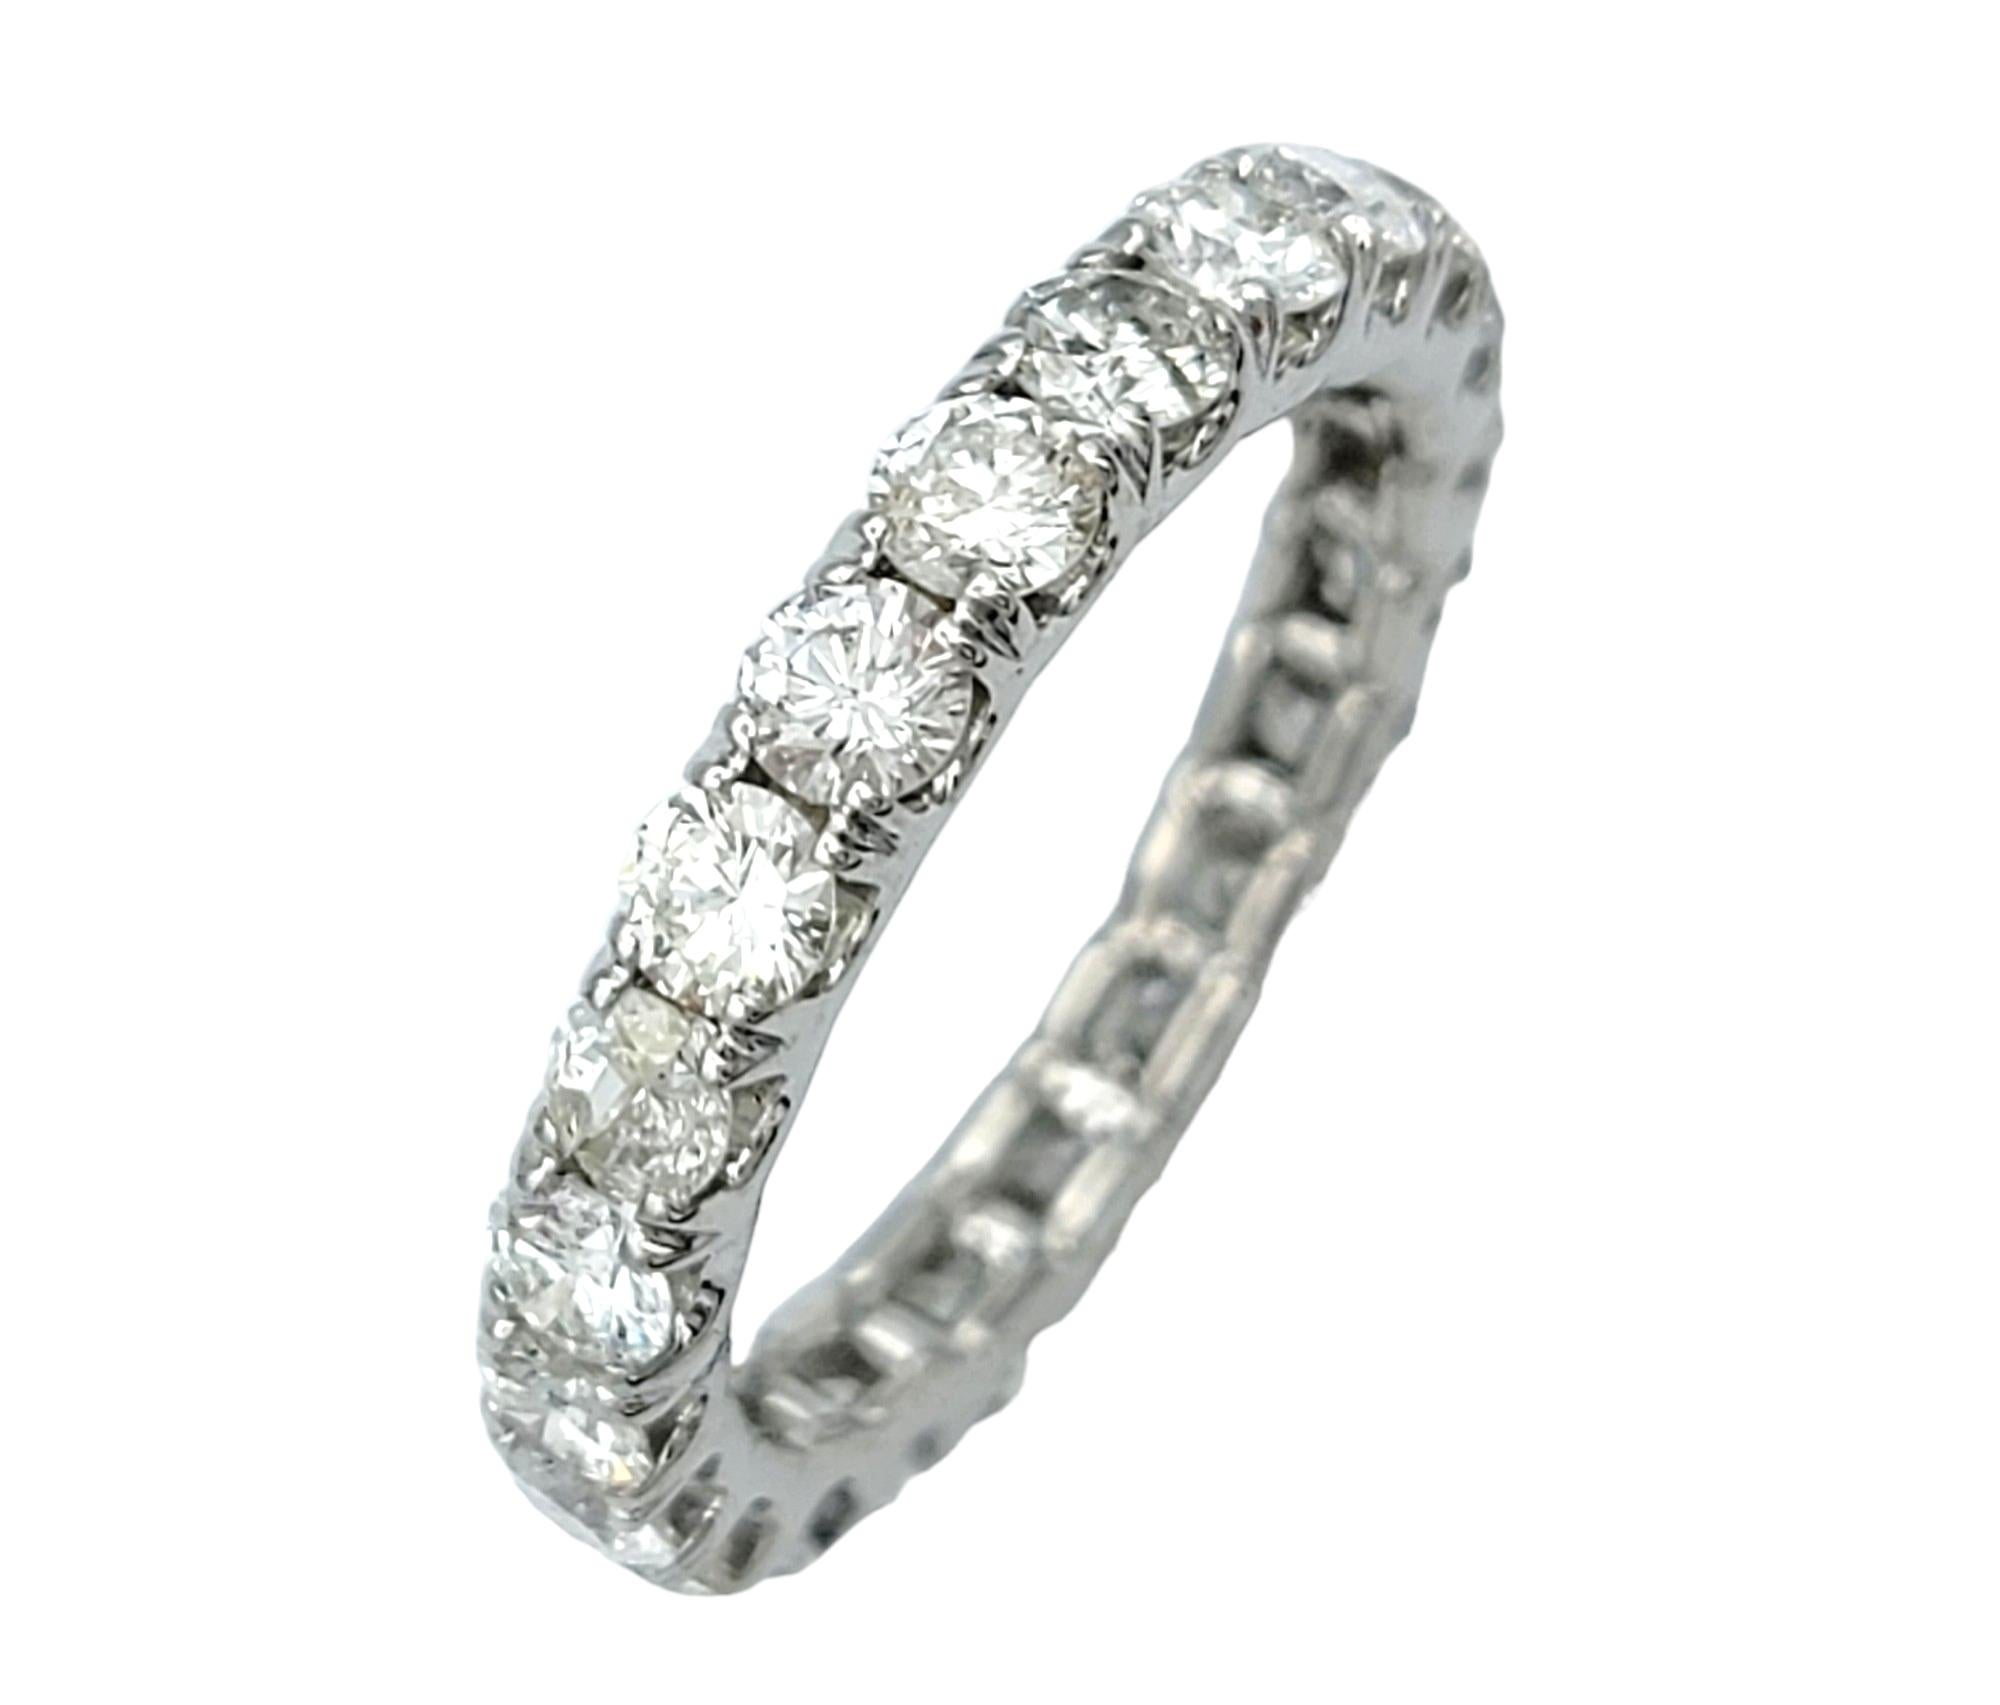 Contemporary 2.20 Carat Round Diamond Eternity Band Ring in 18 Karat White Gold, F-G / VS2 For Sale